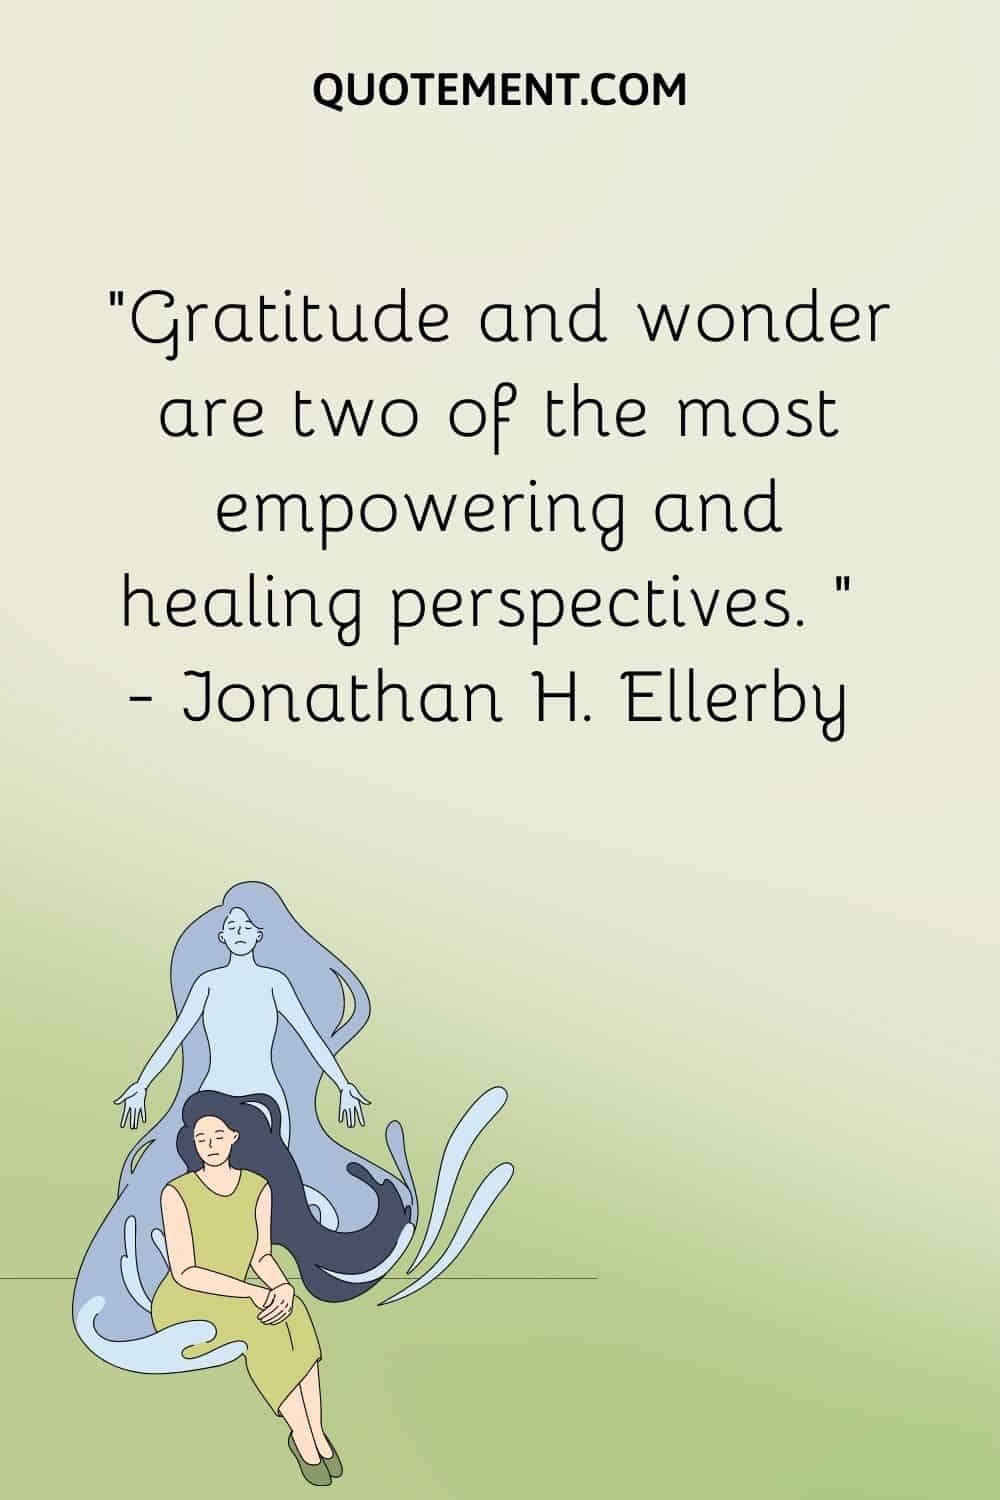 Gratitude and wonder are two of the most empowering and healing perspectives